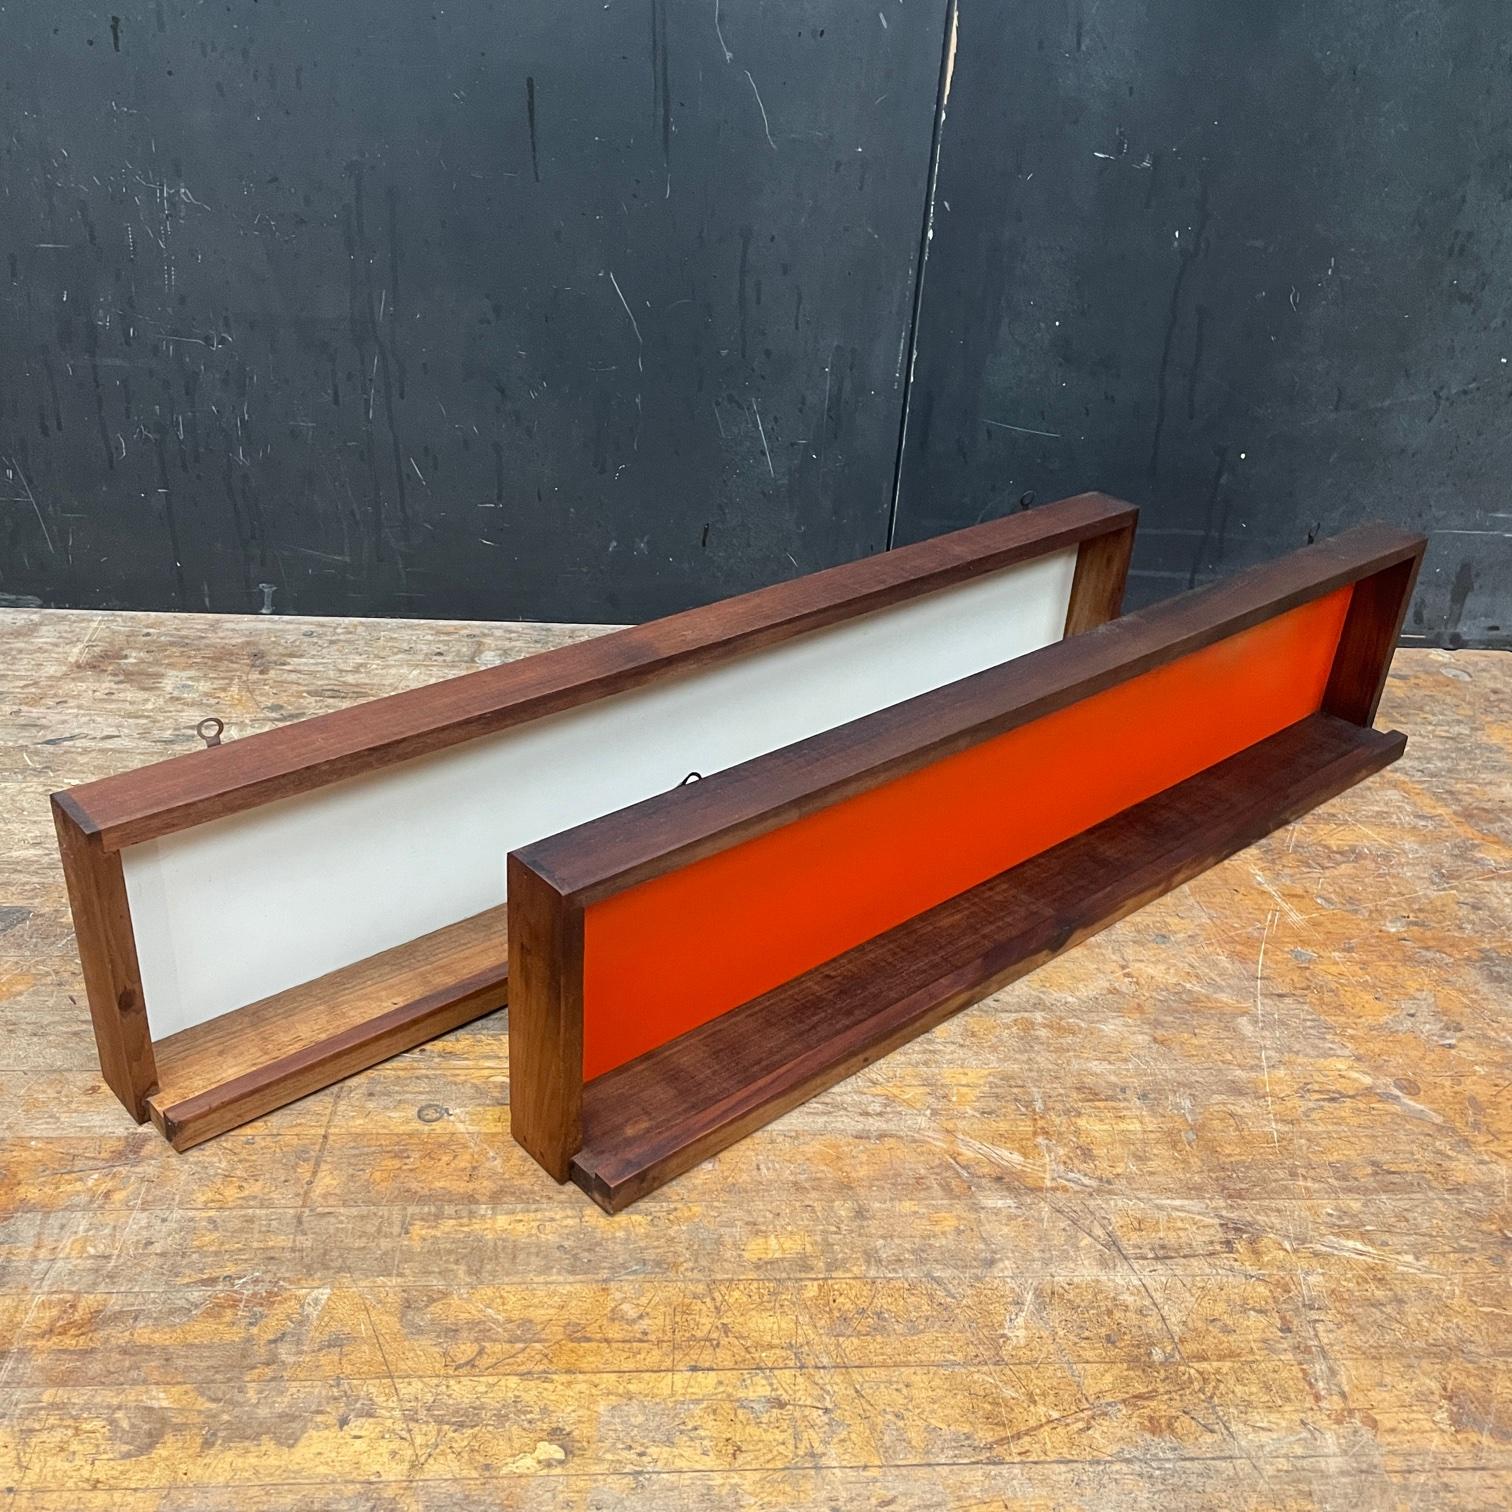 A pair of kitchen spice shelves in the manner of Peter Pepper Products. Or something out of a Charles Goodman Pot and Beam Home. No Labels present.

Measures: W 29 1/16 x H 6 3/8 x D 2 13/16 / Top Box D 1 5/8 in.
   